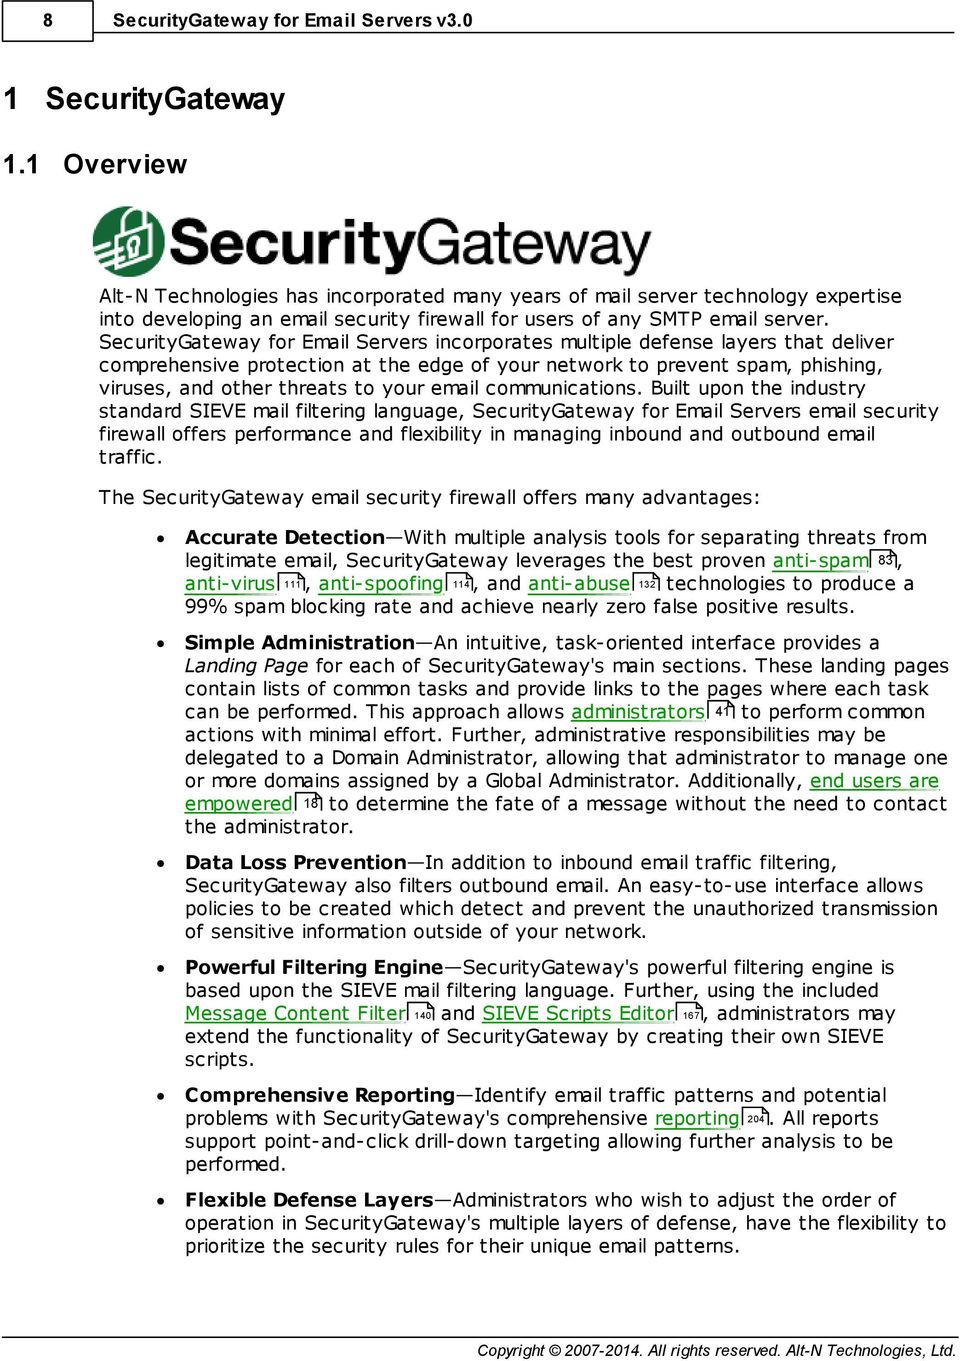 SecurityGateway for Email Servers incorporates multiple defense layers that deliver comprehensive protection at the edge of your network to prevent spam, phishing, viruses, and other threats to your